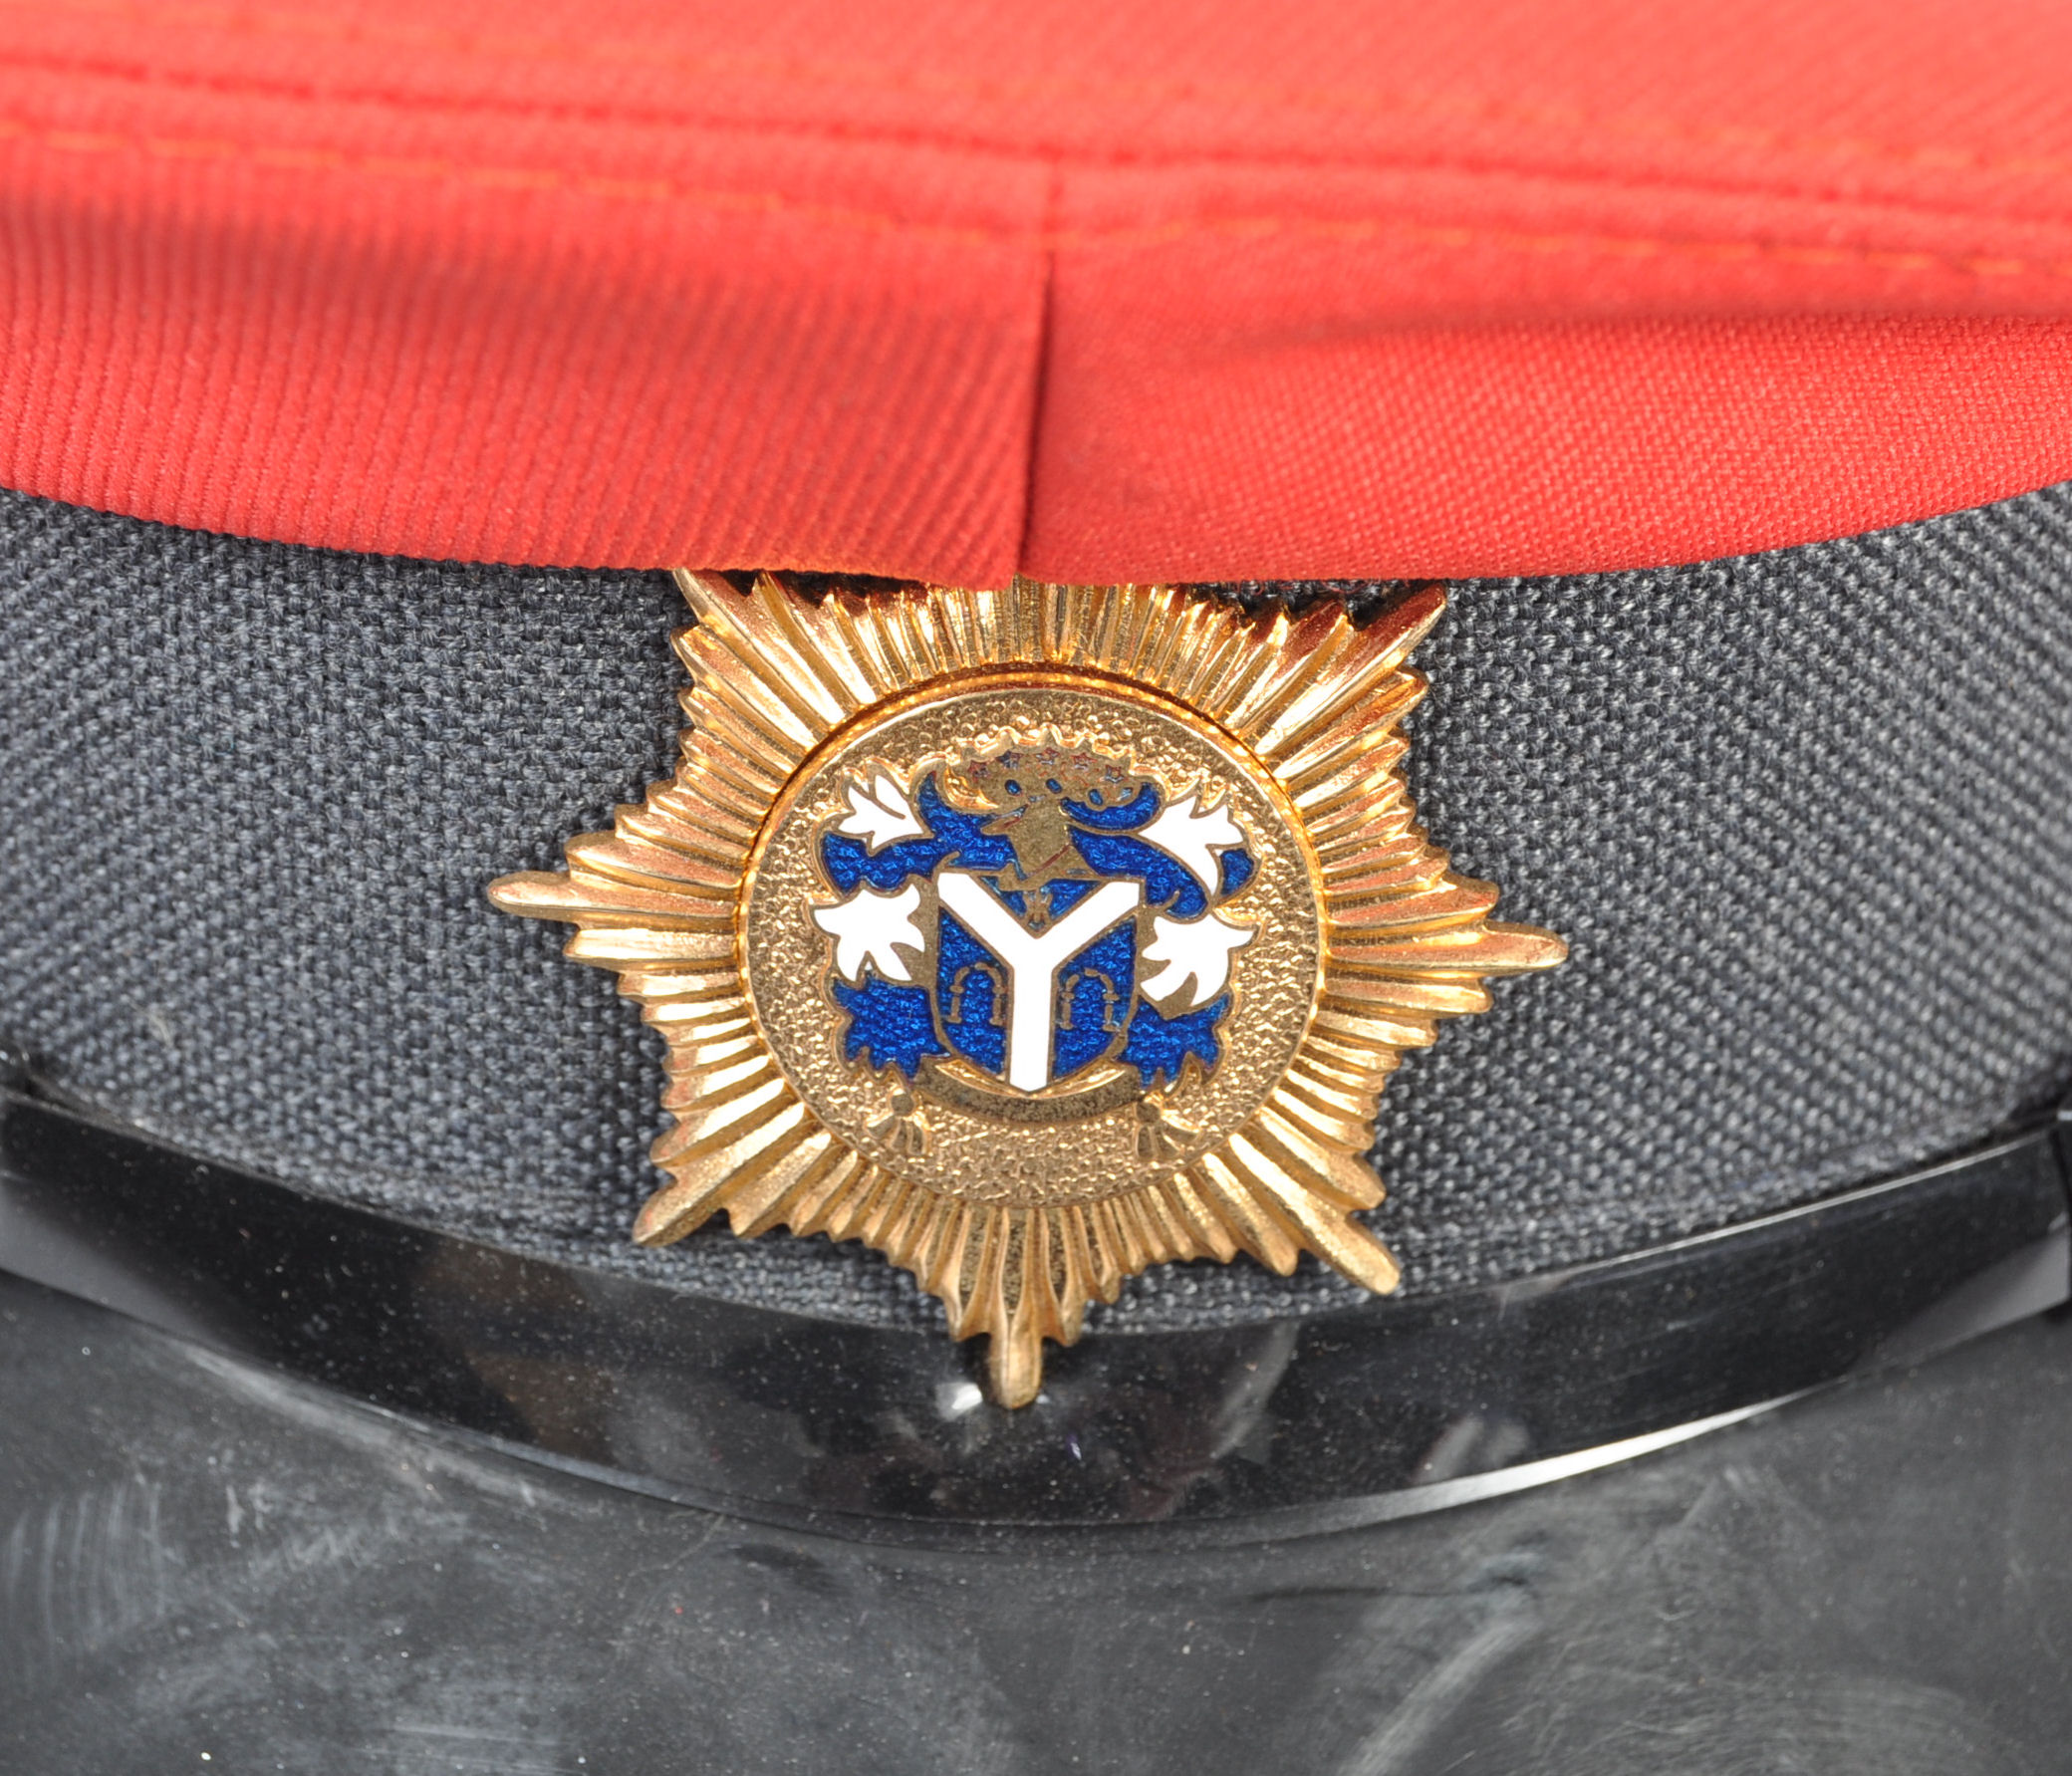 UNIFORM AND FANCY DRESS - A COLLECTION OF SIX MILITARY SERVICE CAPS. - Image 2 of 7